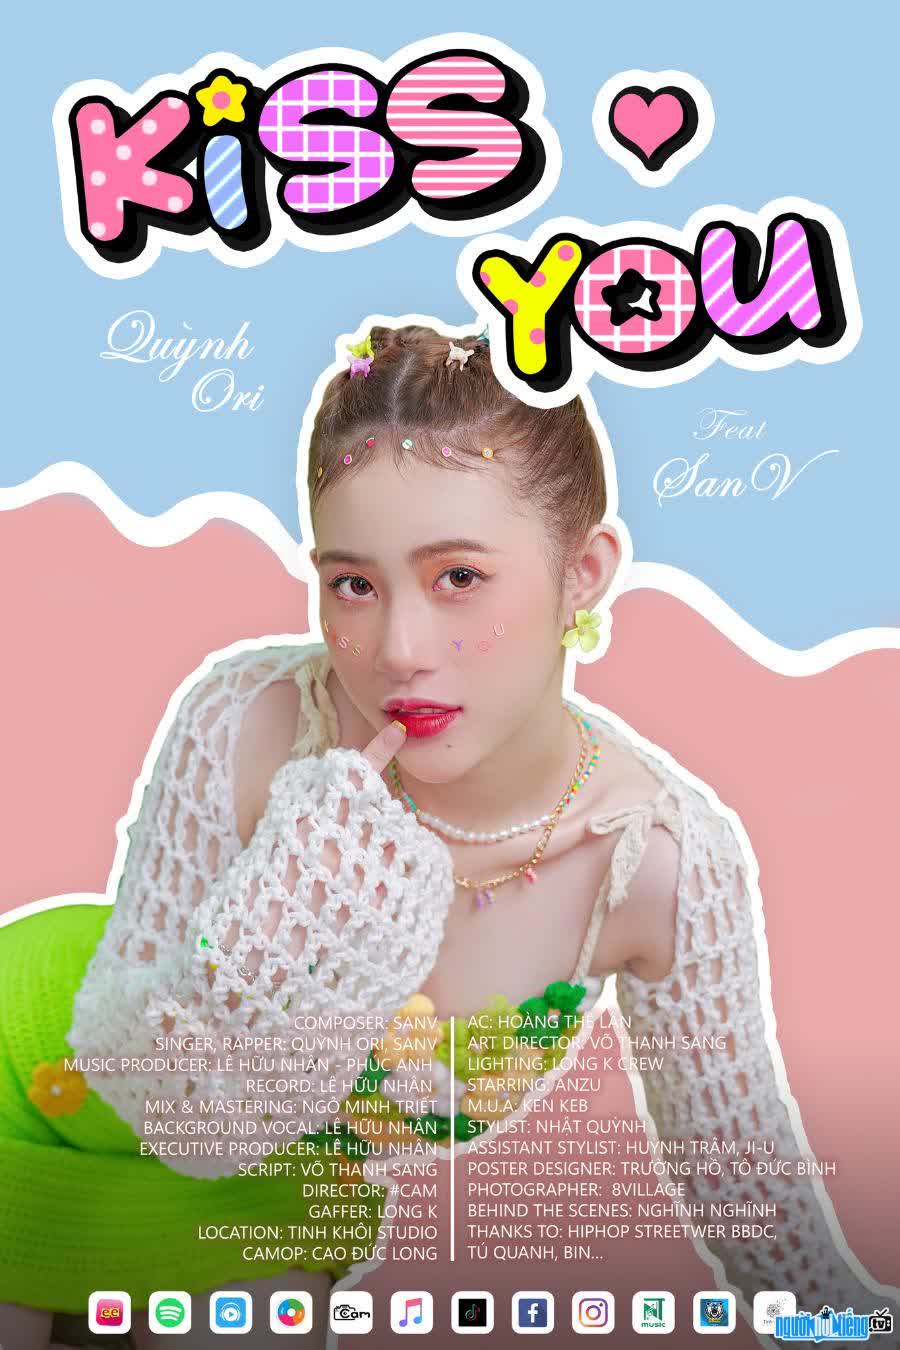 Singer Quynh Ori has just released her first MV titled "Kiss you"